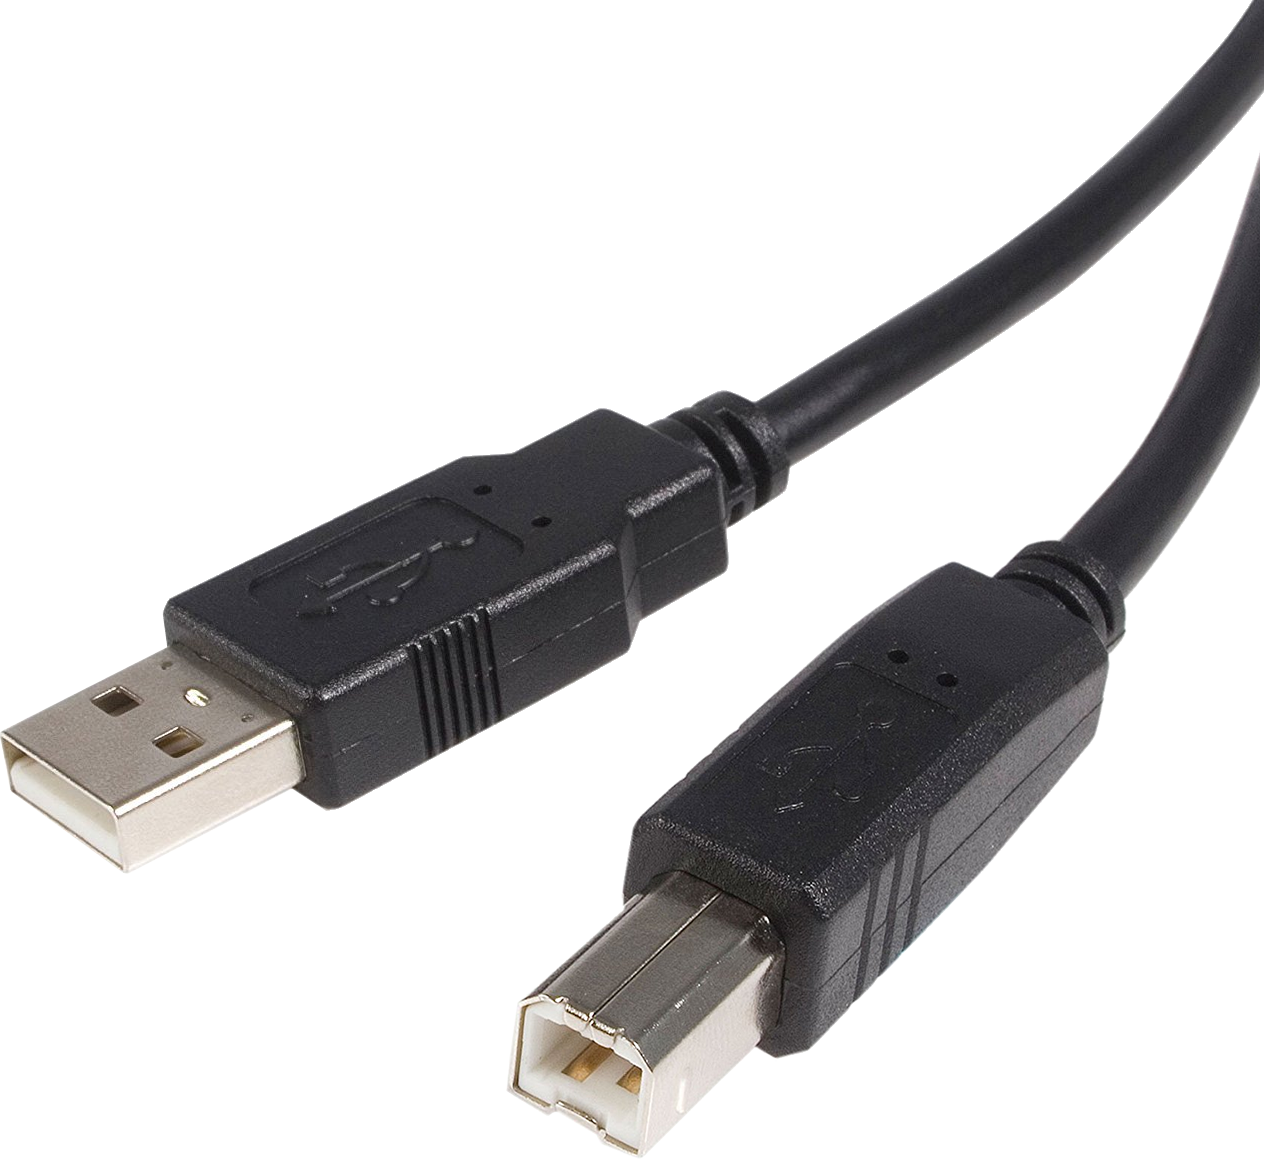 16-6512 USB 2.0 A Male to USB B Male Cable